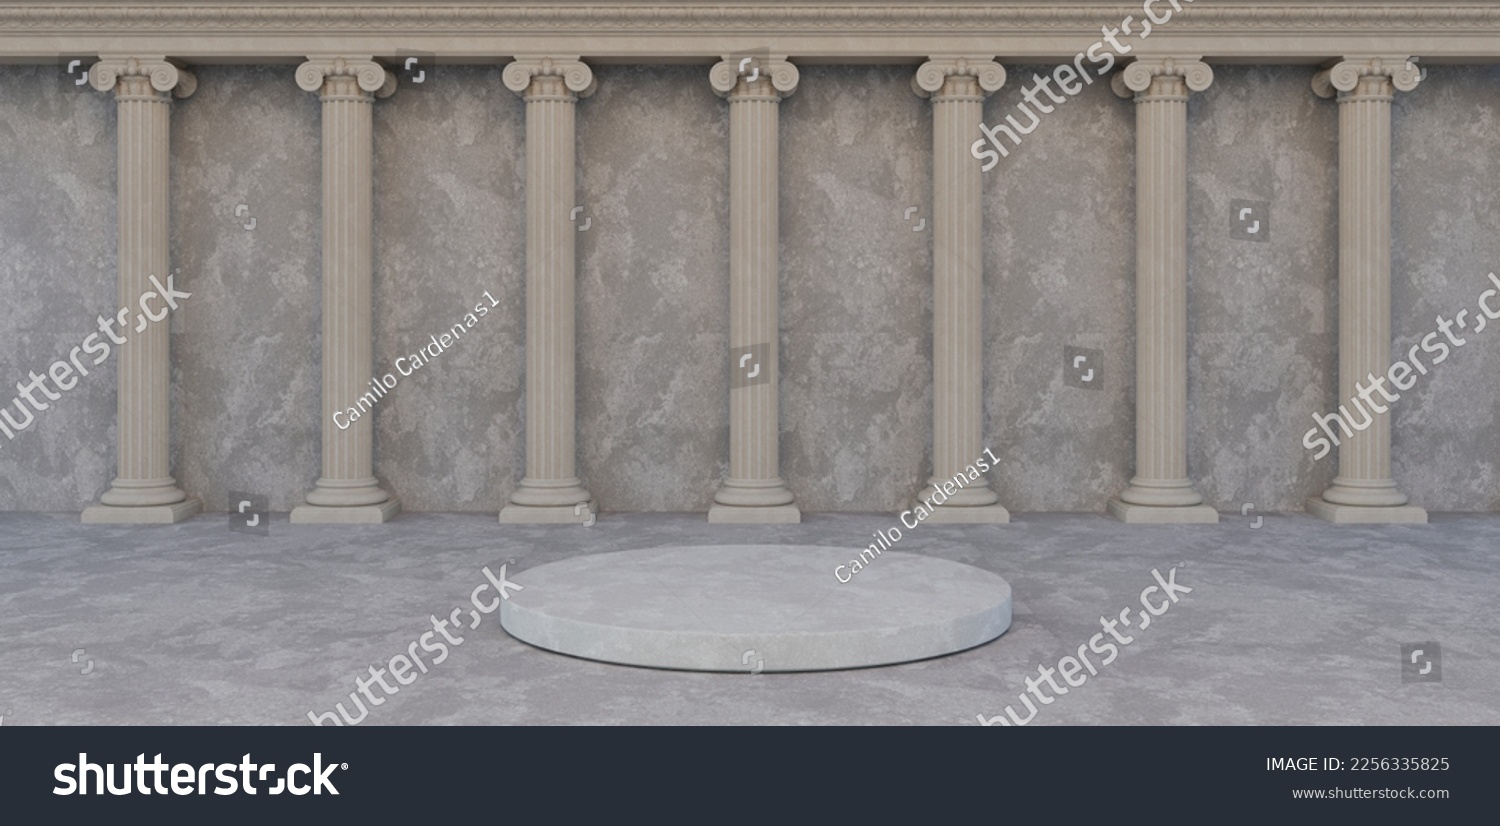 SVG of Ancient greek architecture with pillars. Vector realistic antique building with white marble wall and column with capital in jonic style. Background with roman temple svg